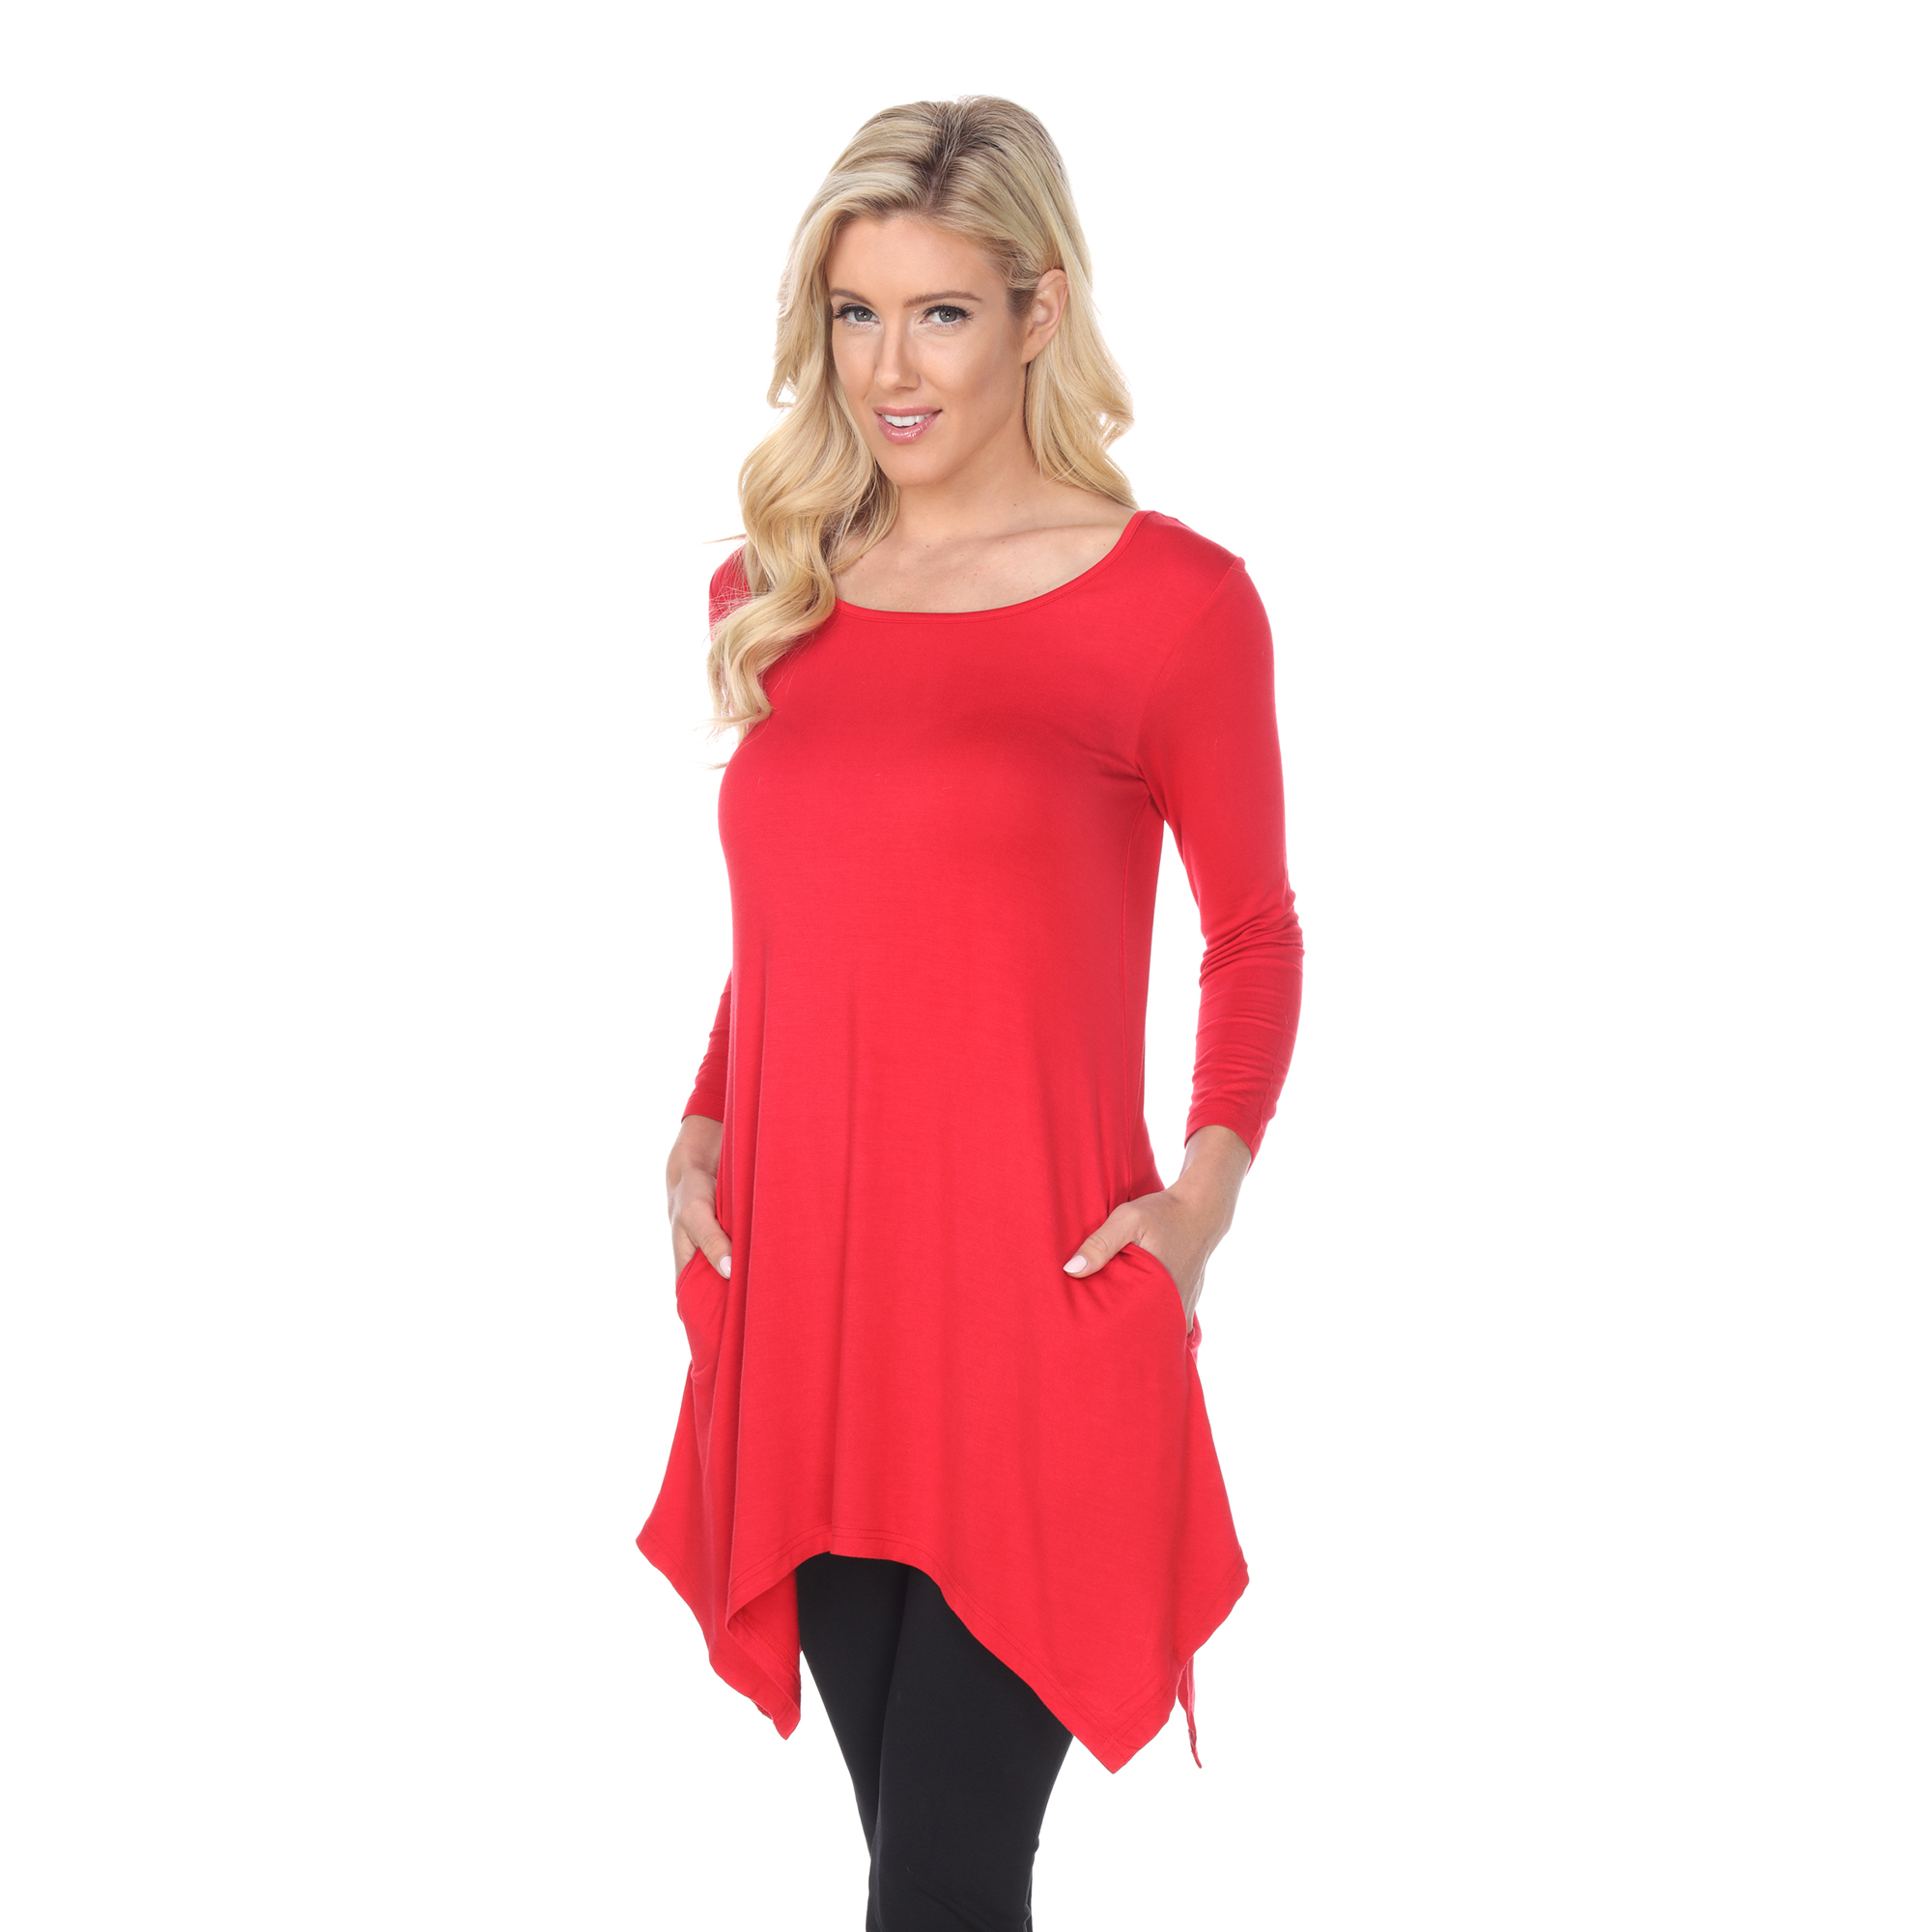 White Mark Women's Quarter Sleeve Tunic Top With Pockets - Red, X-Large